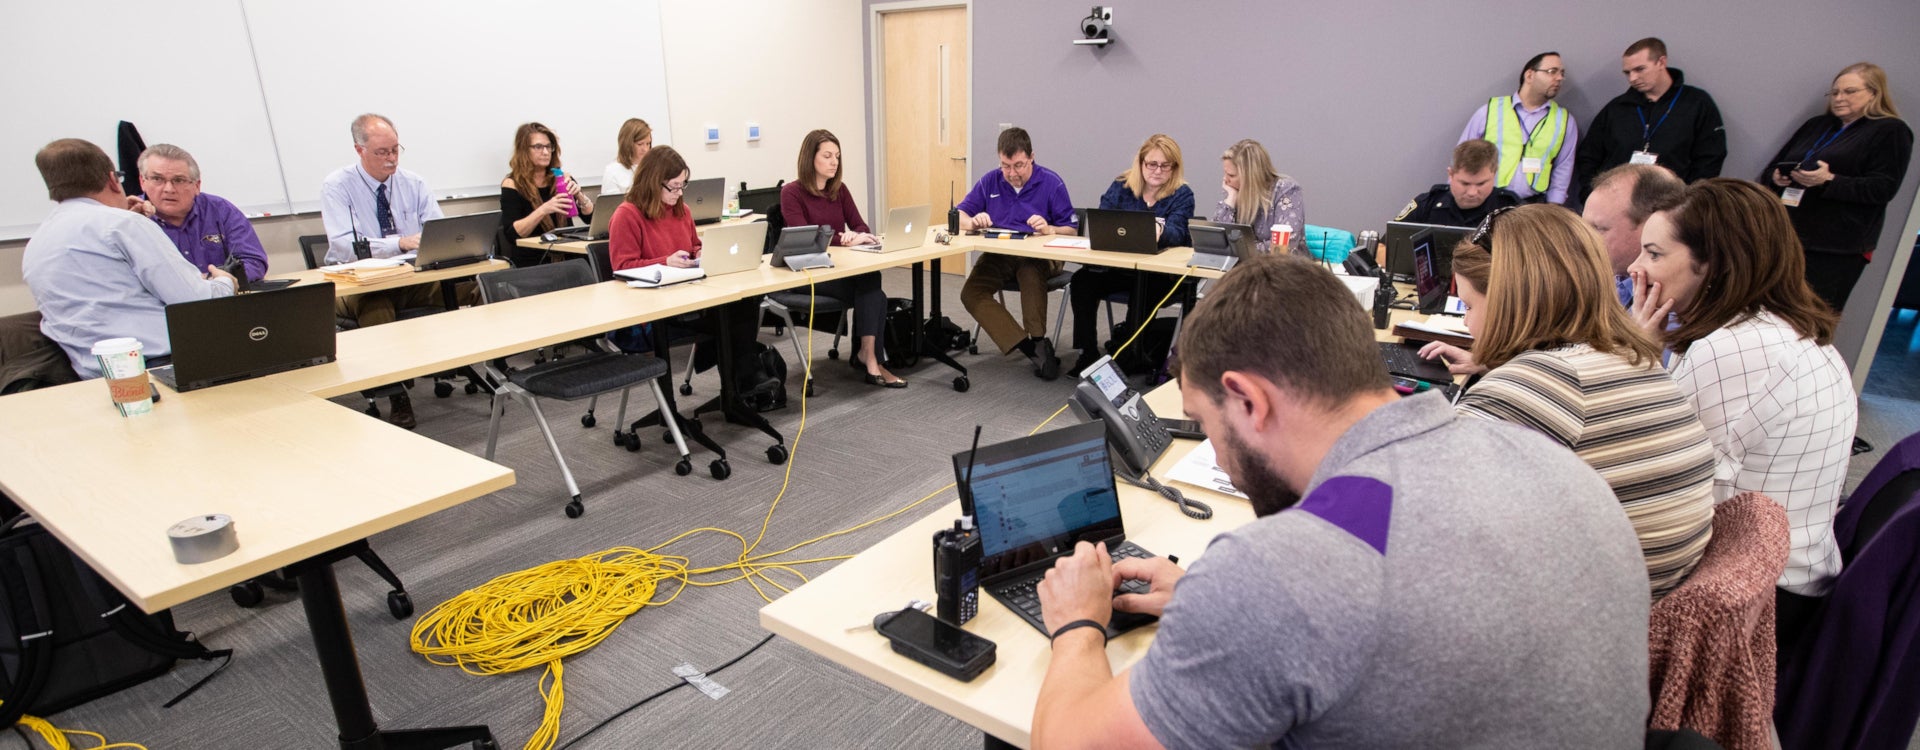 The Emergency Operations Center druing an active shooter drill on the ECU campus Tuesday, Dec. 18, 2018. (ECU Photo by Rhett Butler)